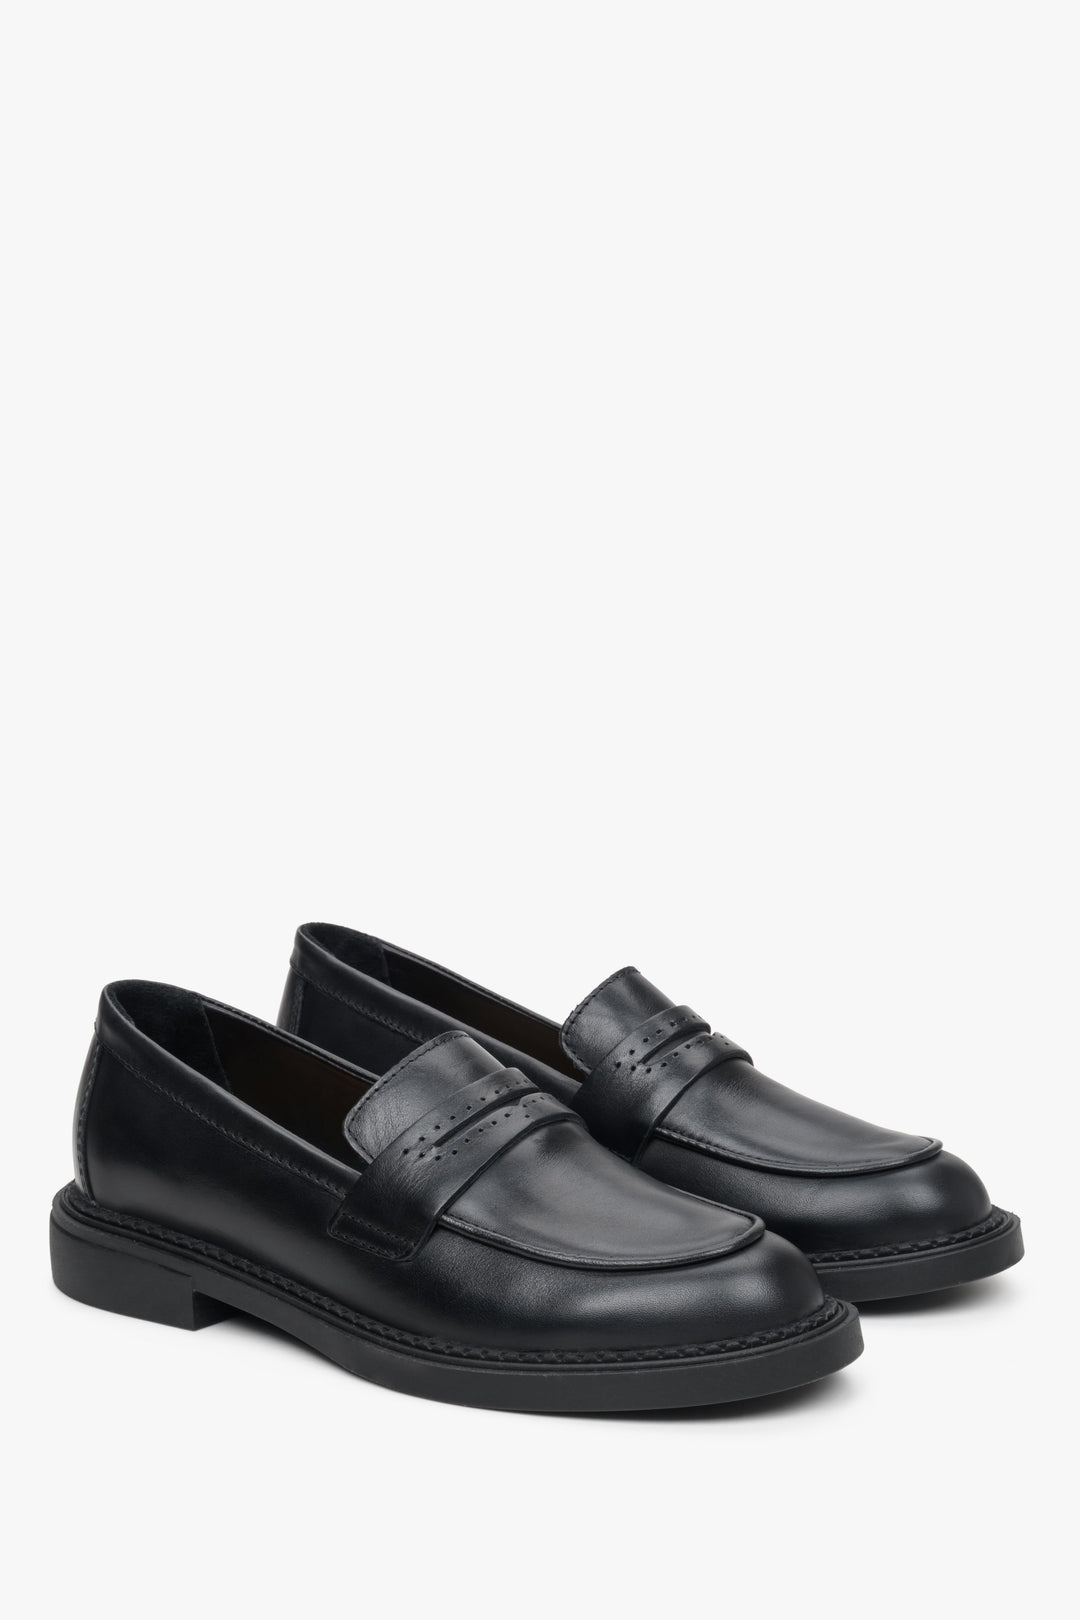 Women's black loafers for fall. 